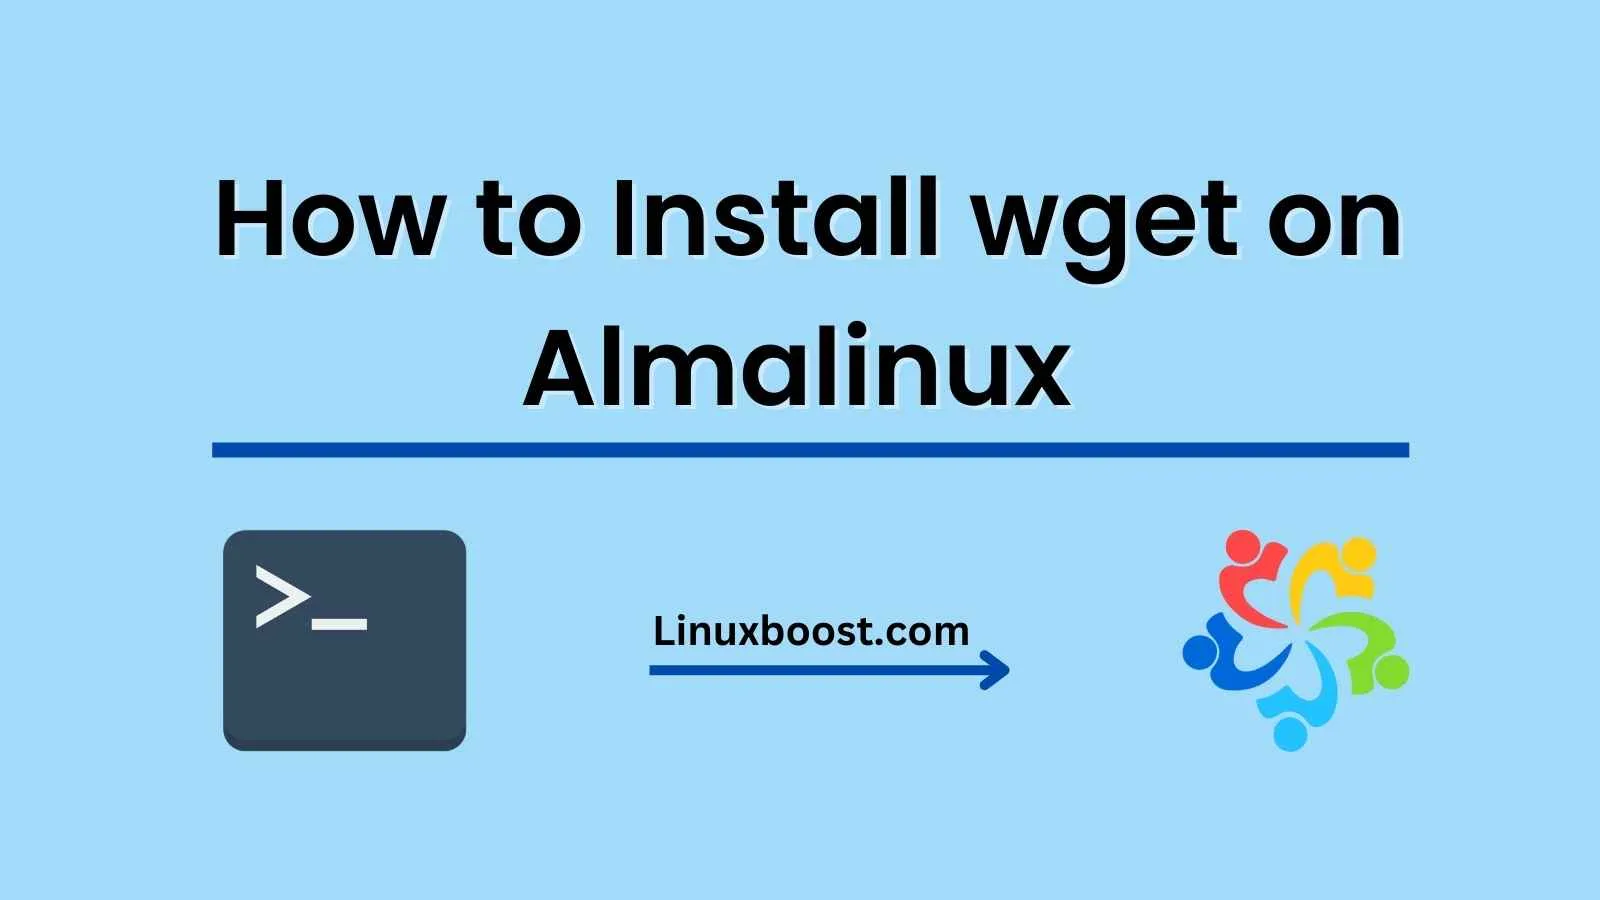 How to Install wget on Almalinux